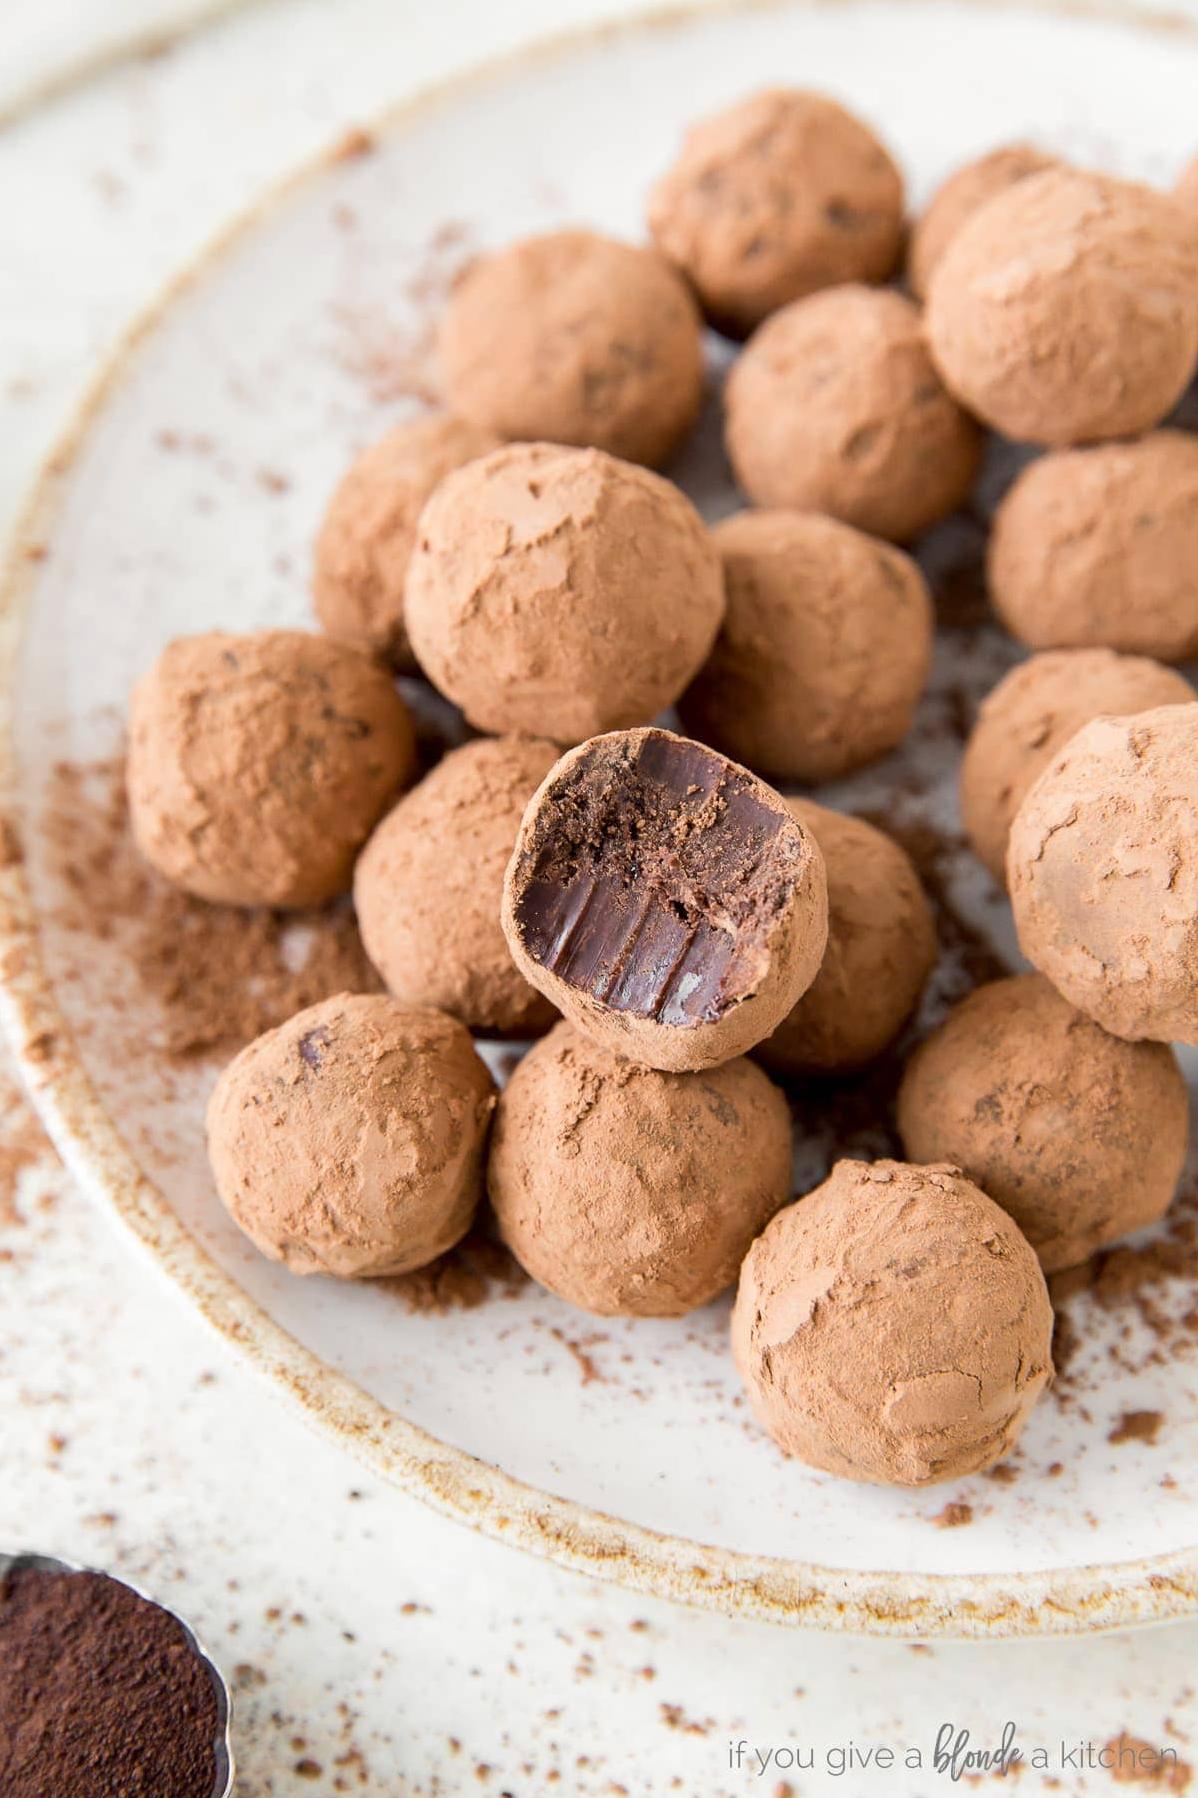  These truffles are the perfect pick-me-up